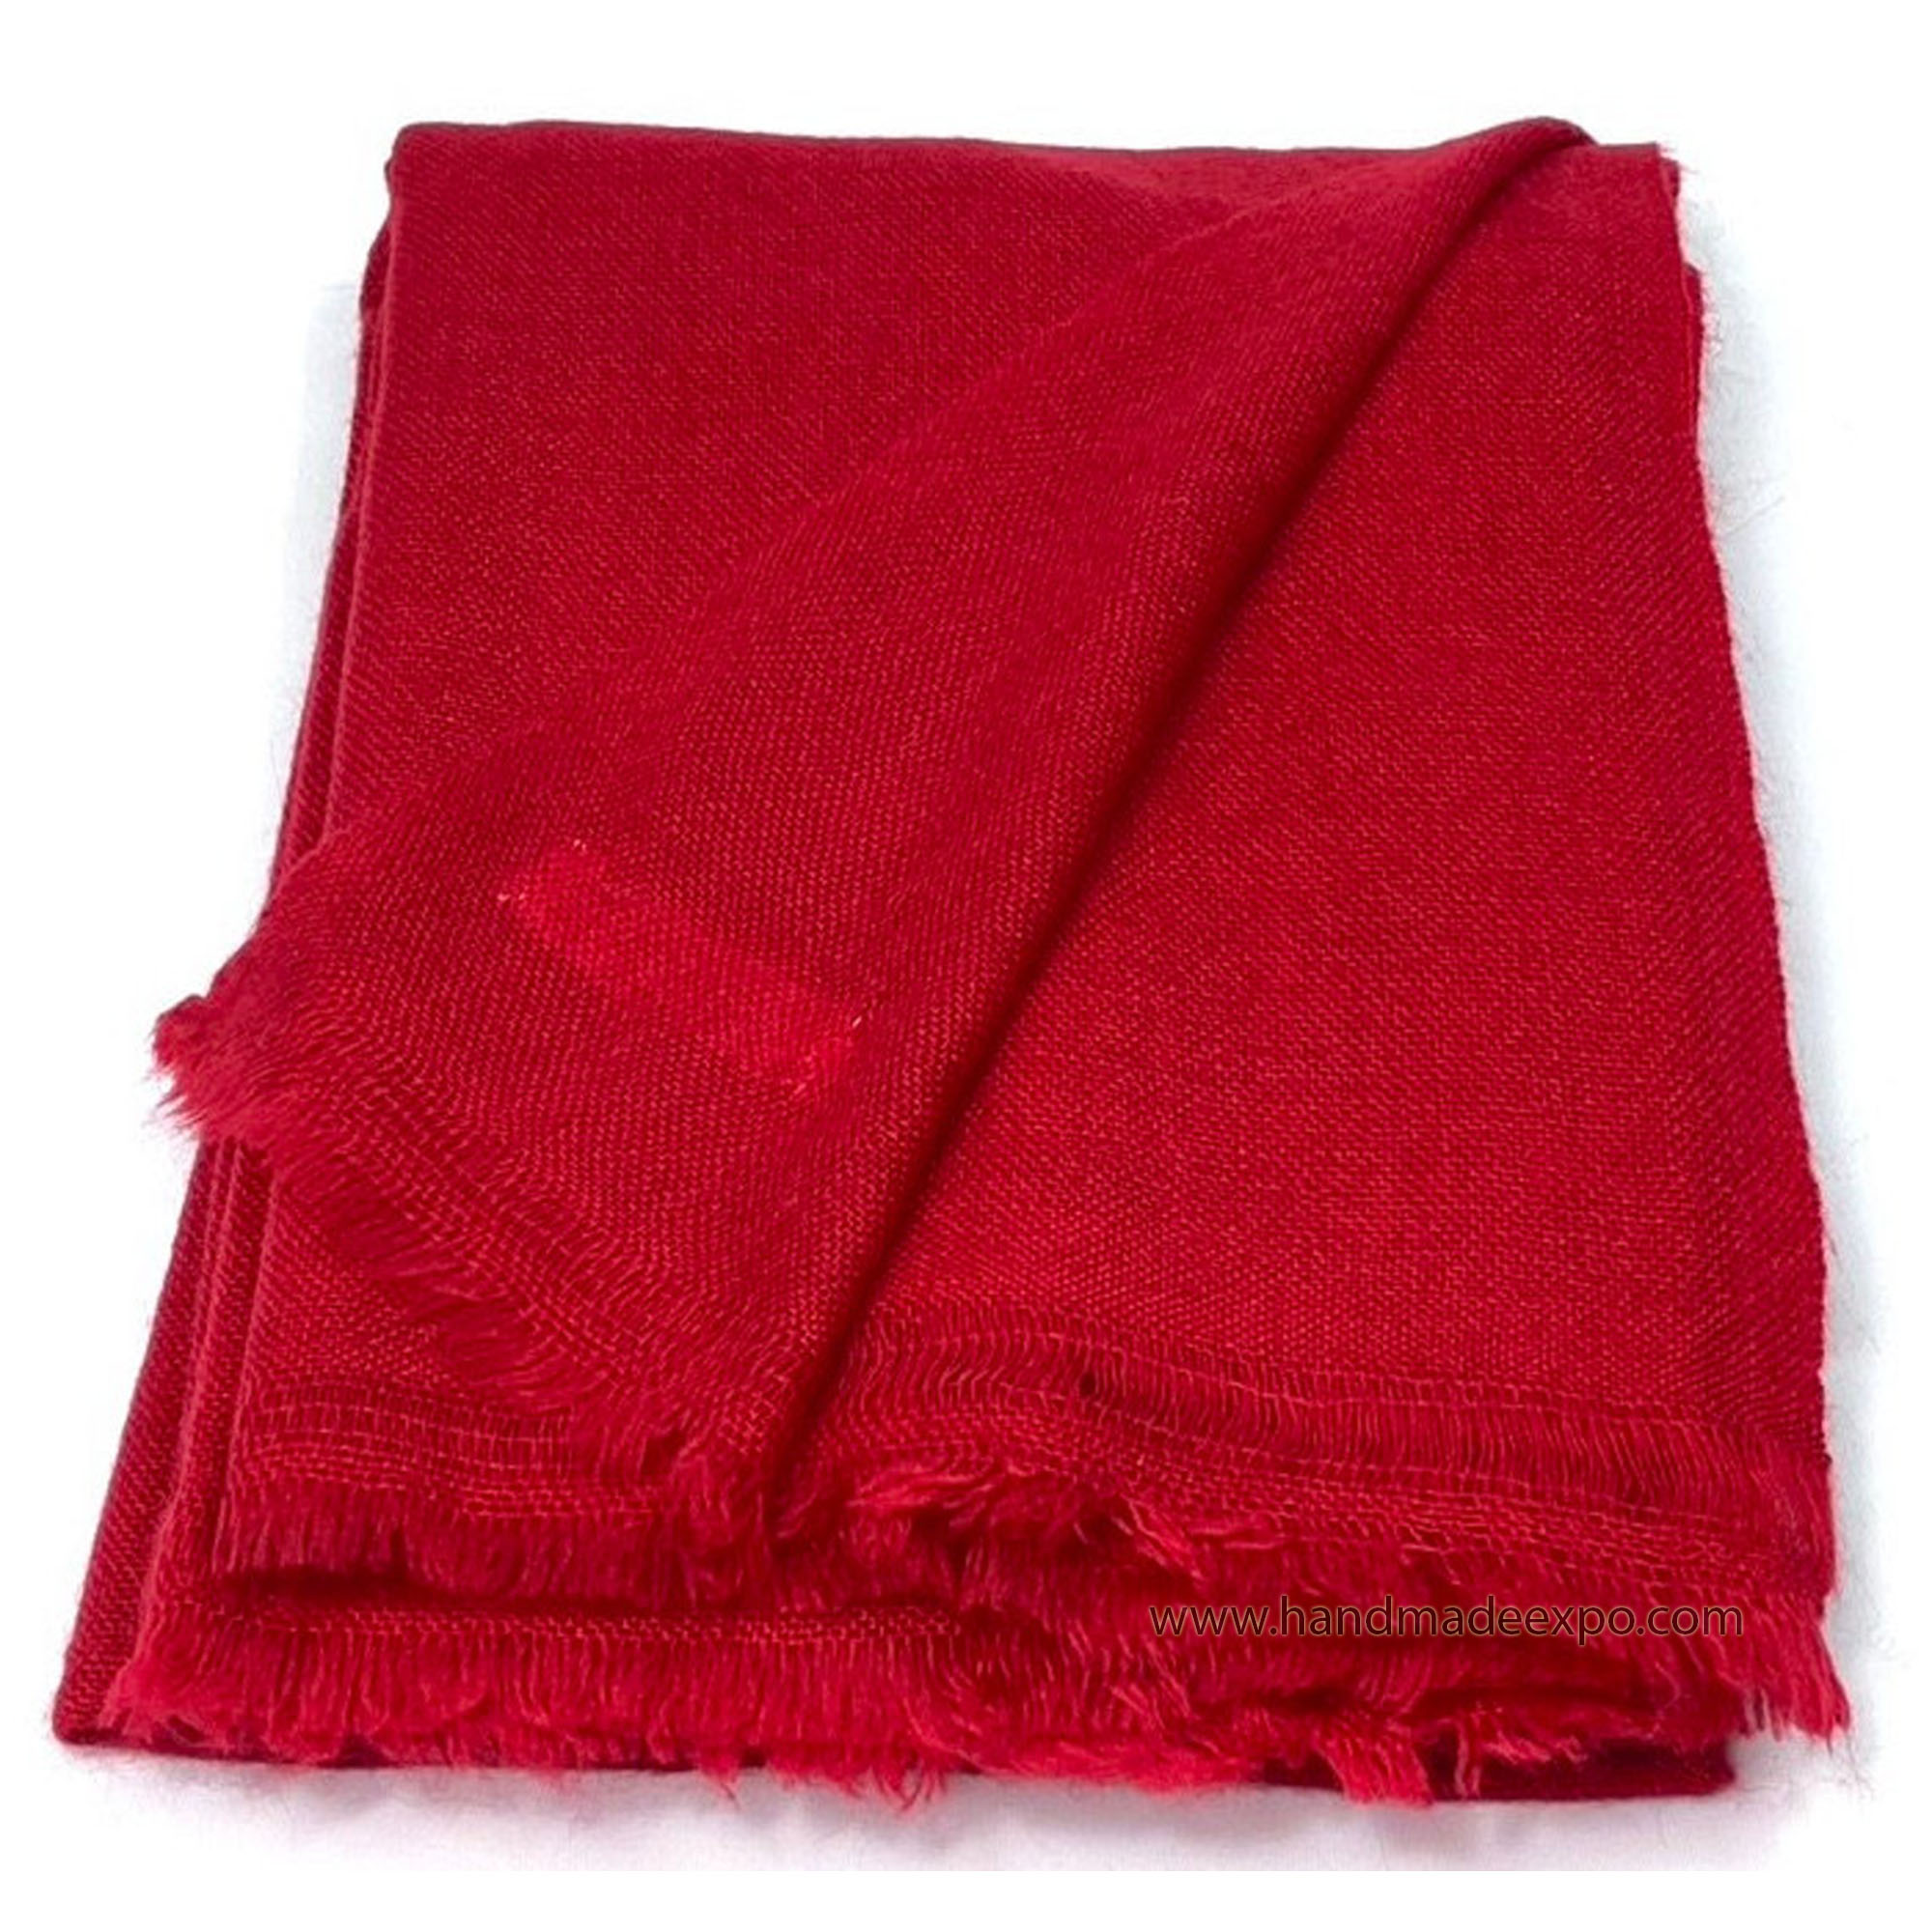 Pashmina Shawl, Nepali Handmade Shawl, In Four Ply Wool, Color Dye dark Red Color